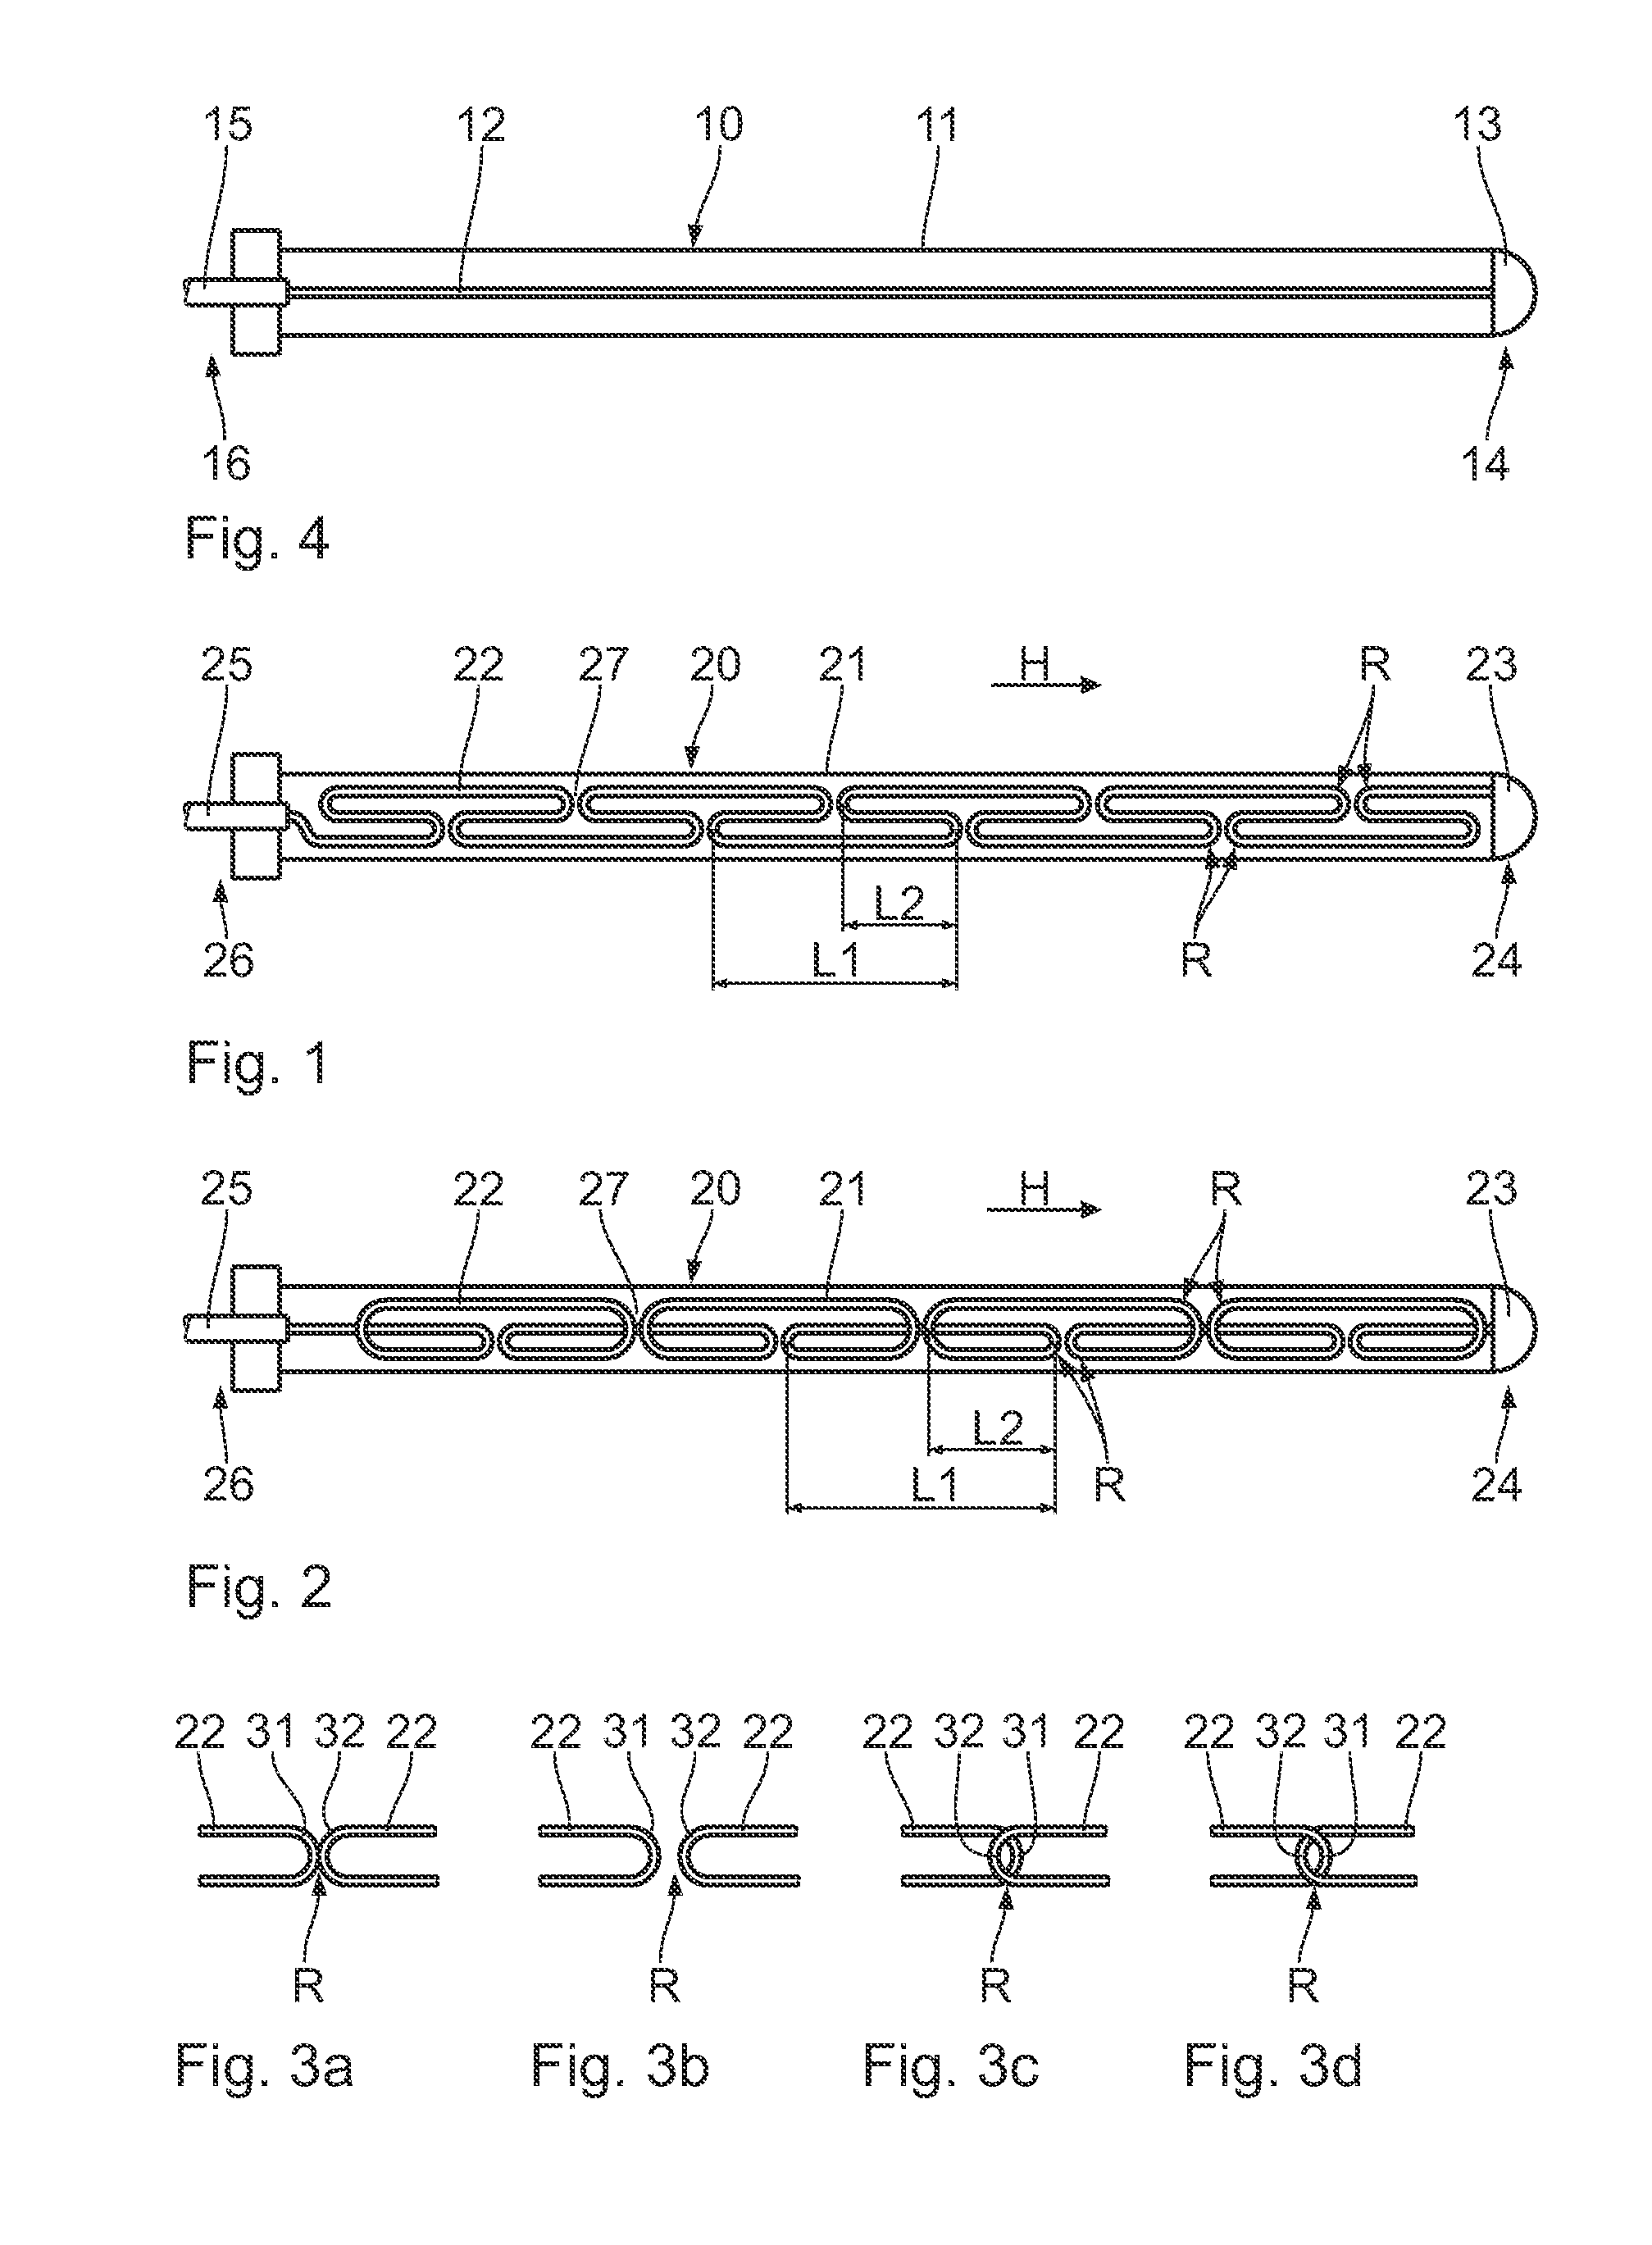 Electrode catheter for intervention purposes